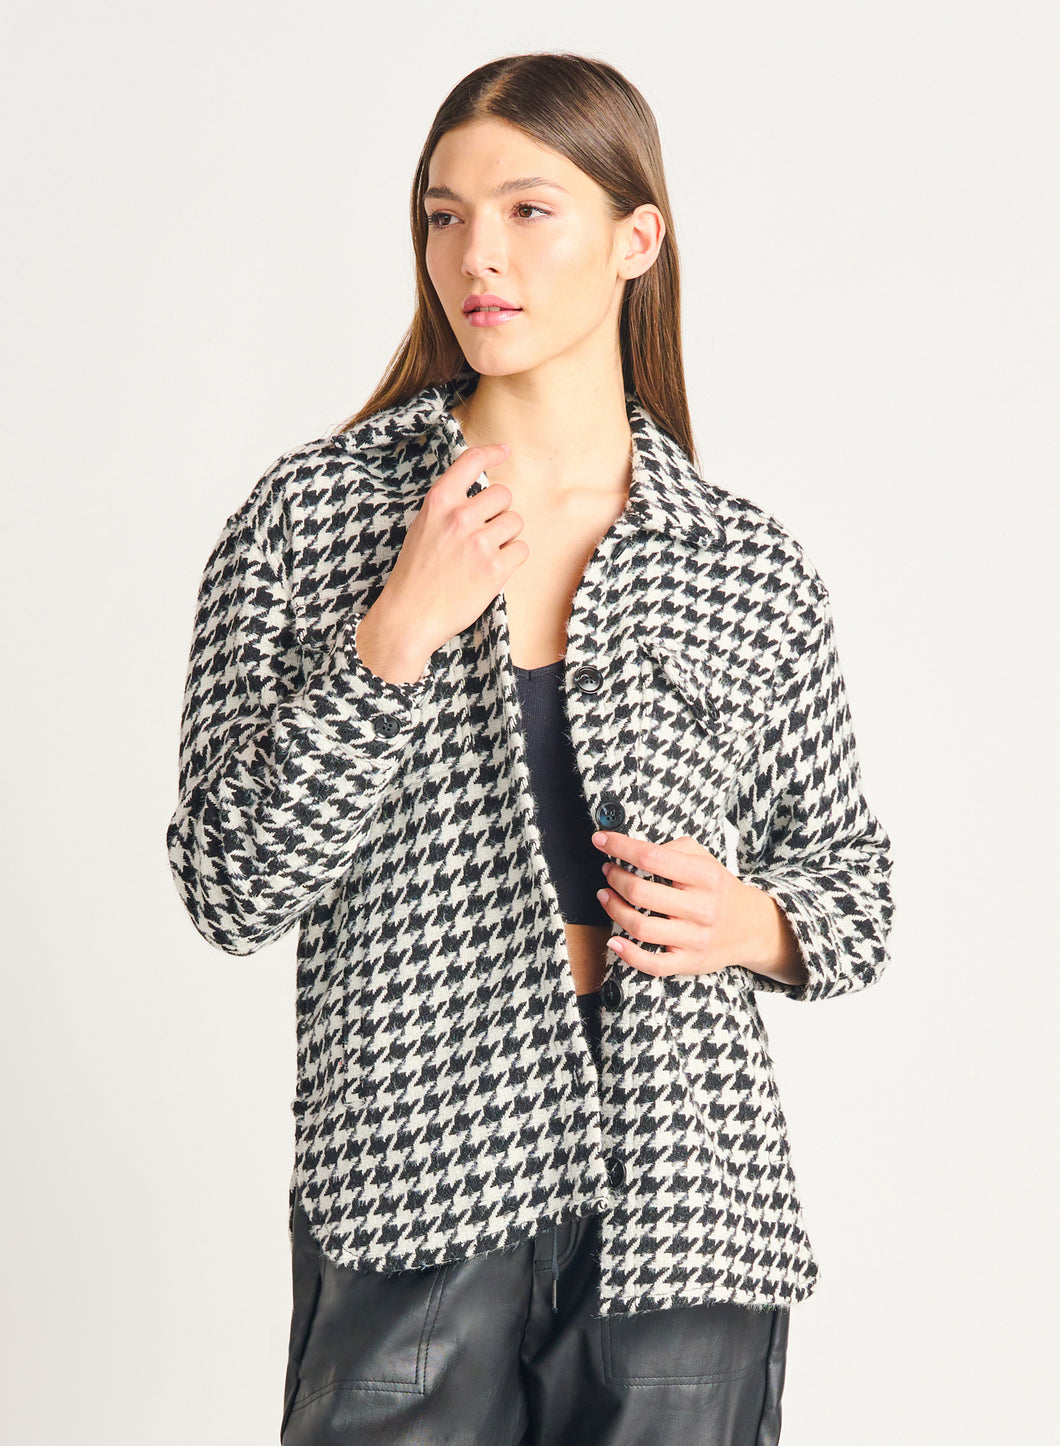 Button Front Houndstooth Shacket by Dex (available in plus sizes)